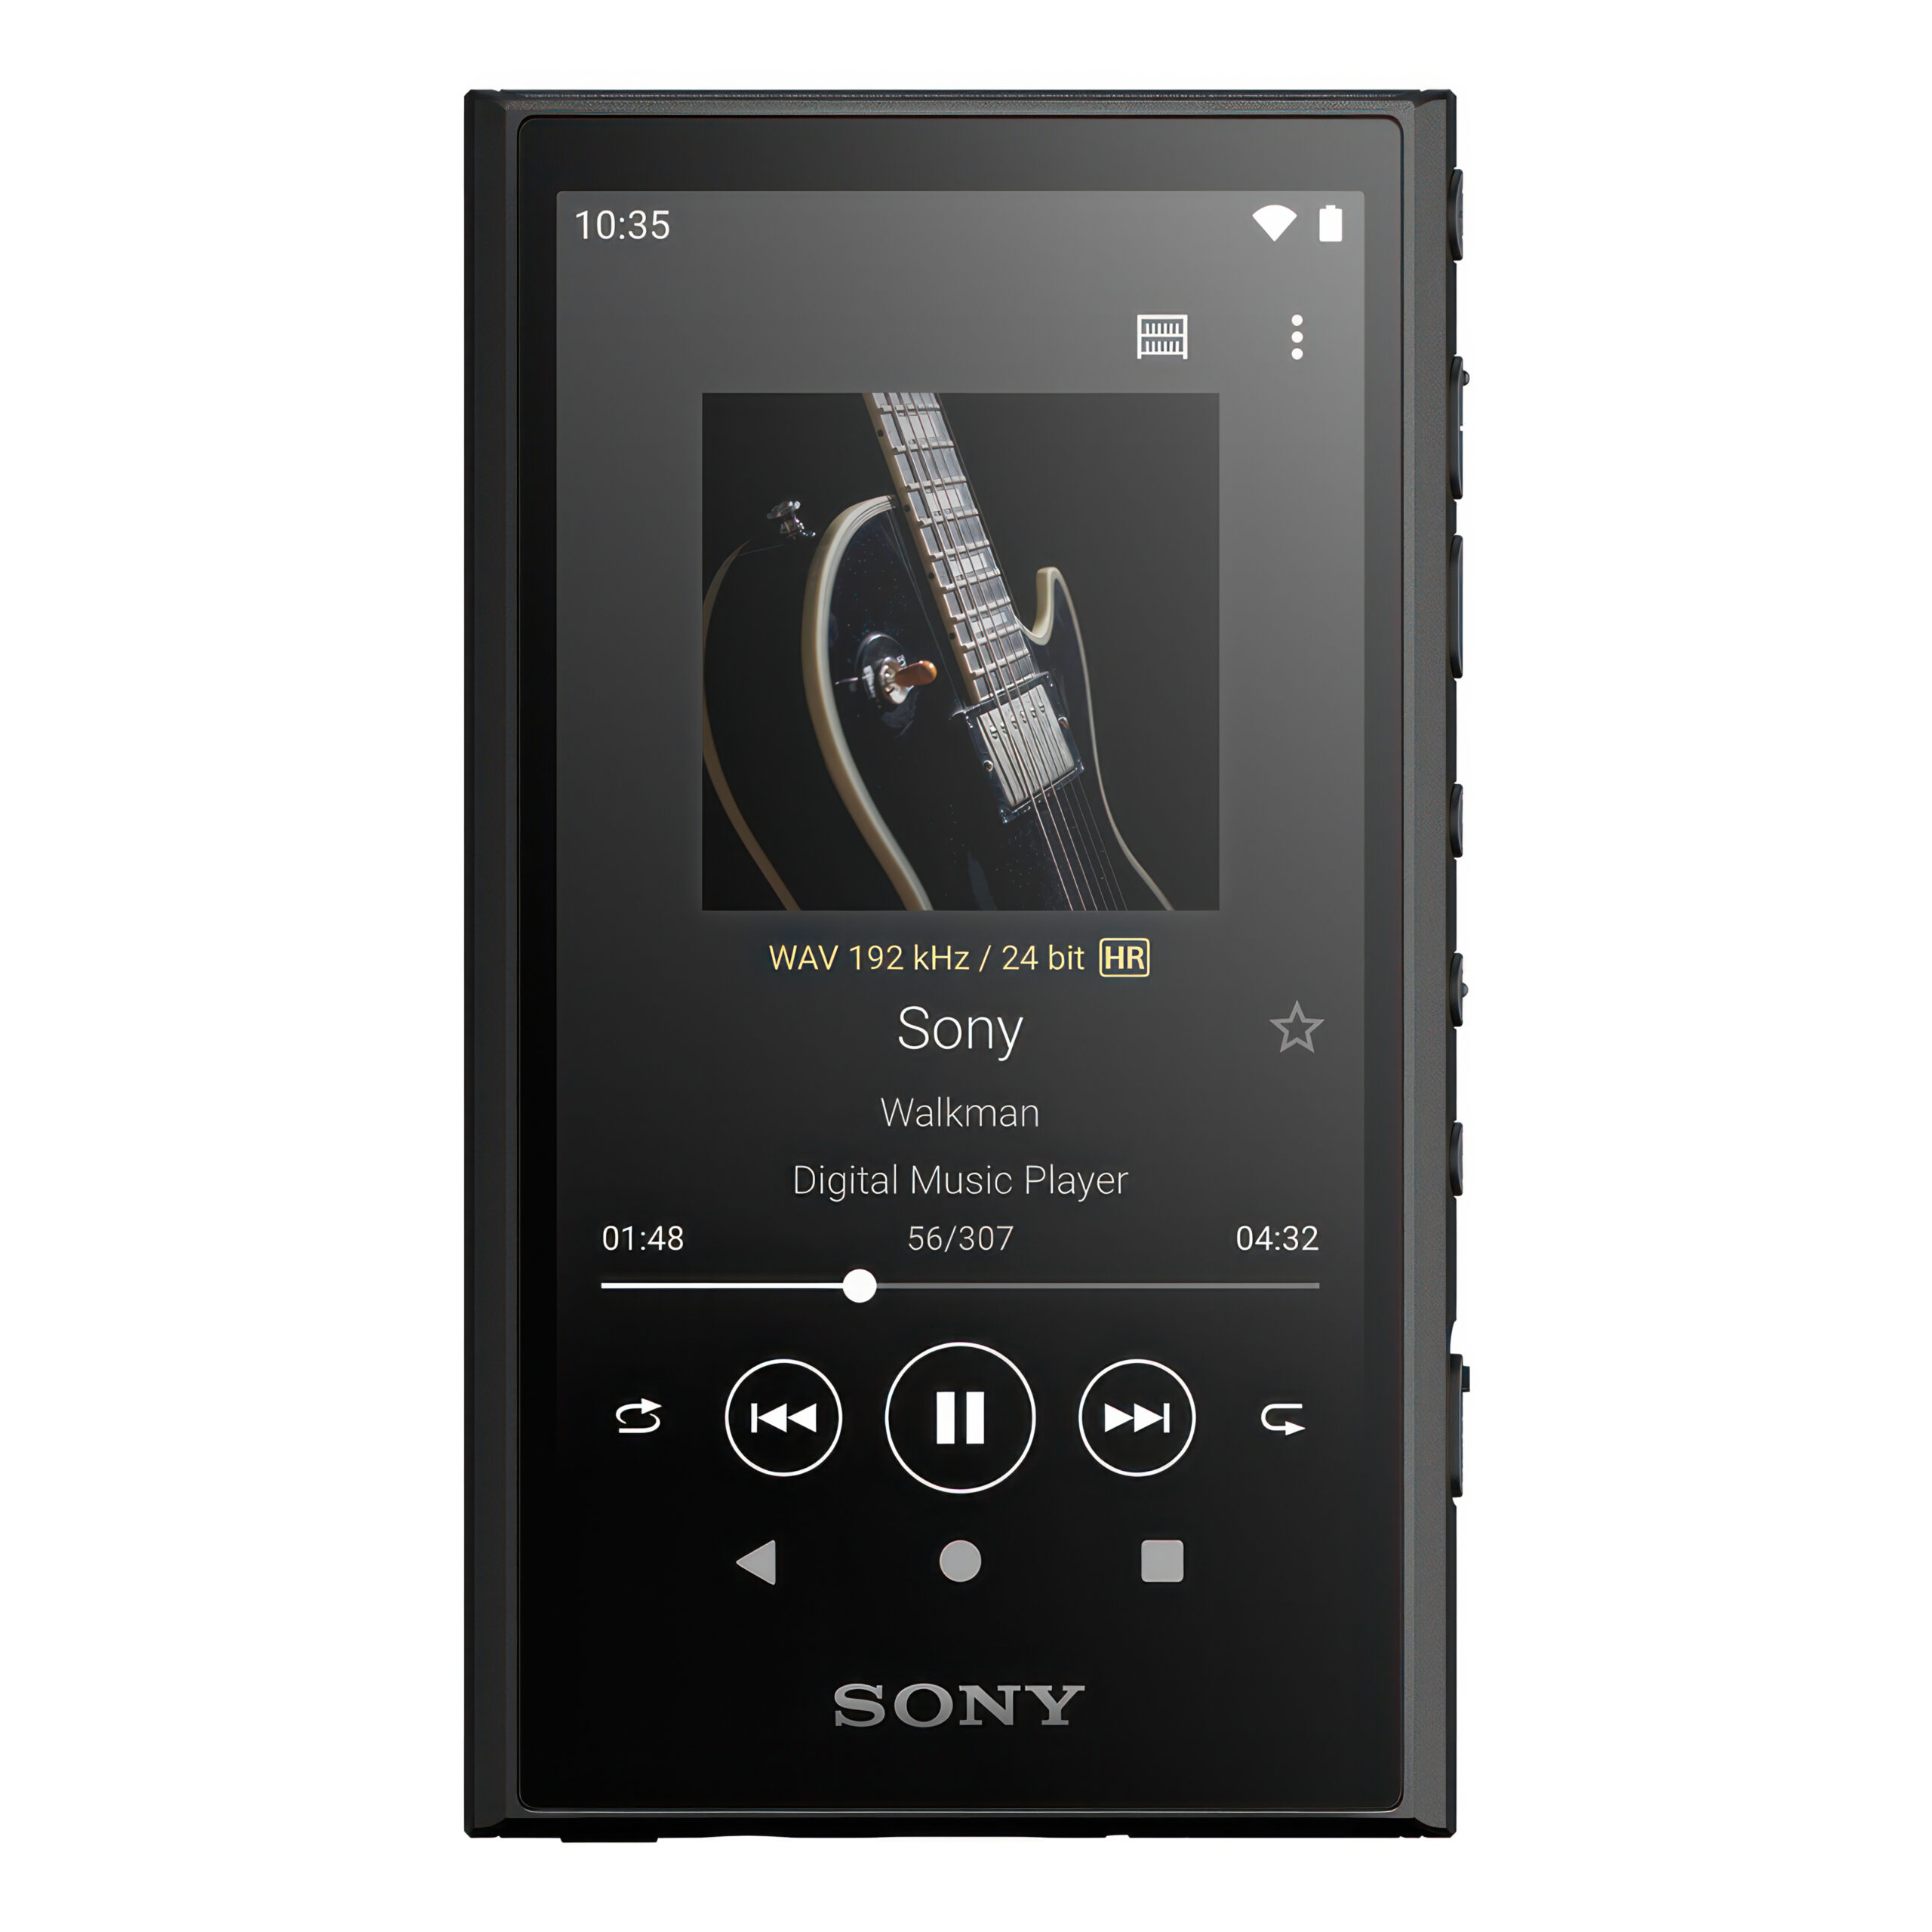 NW-A306: A More Affordable Music Player From Sony